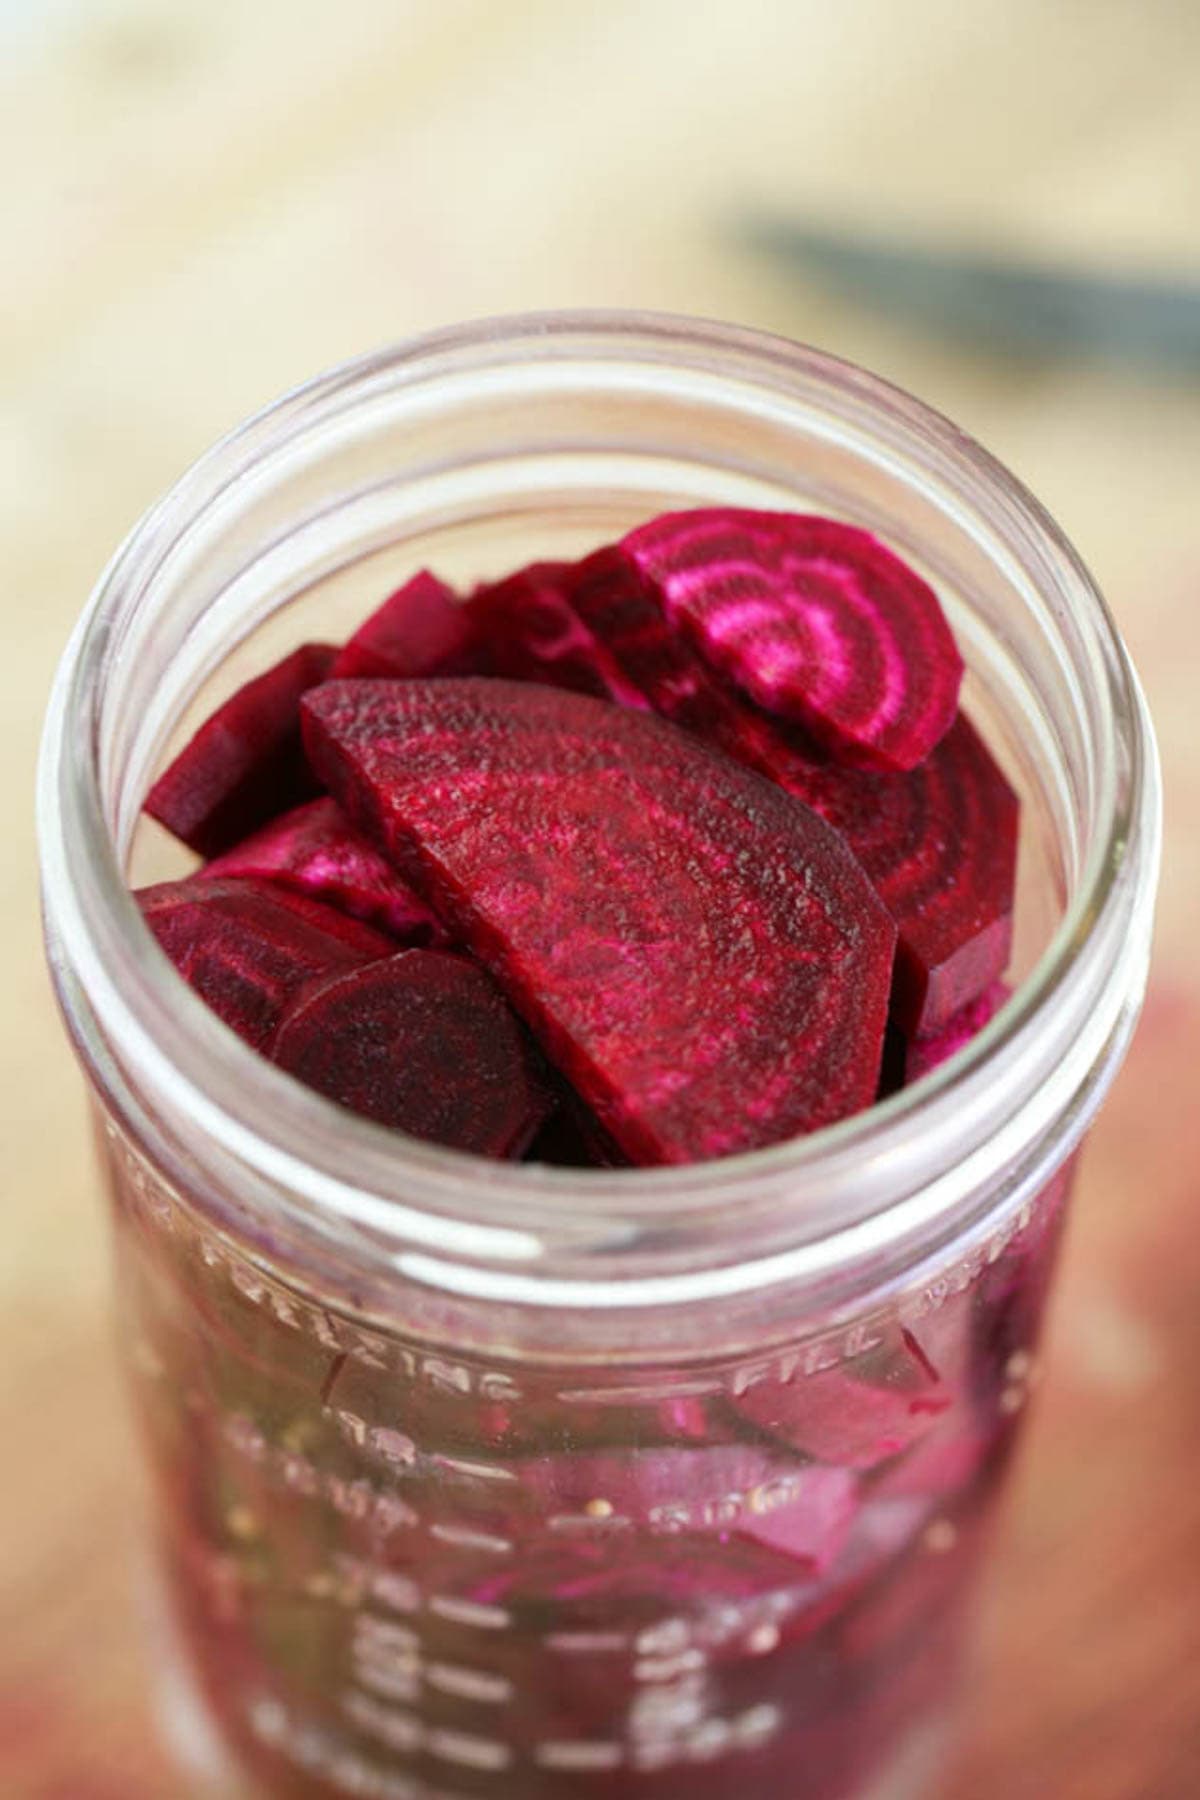 Packing the jar with beets slices and seasonings